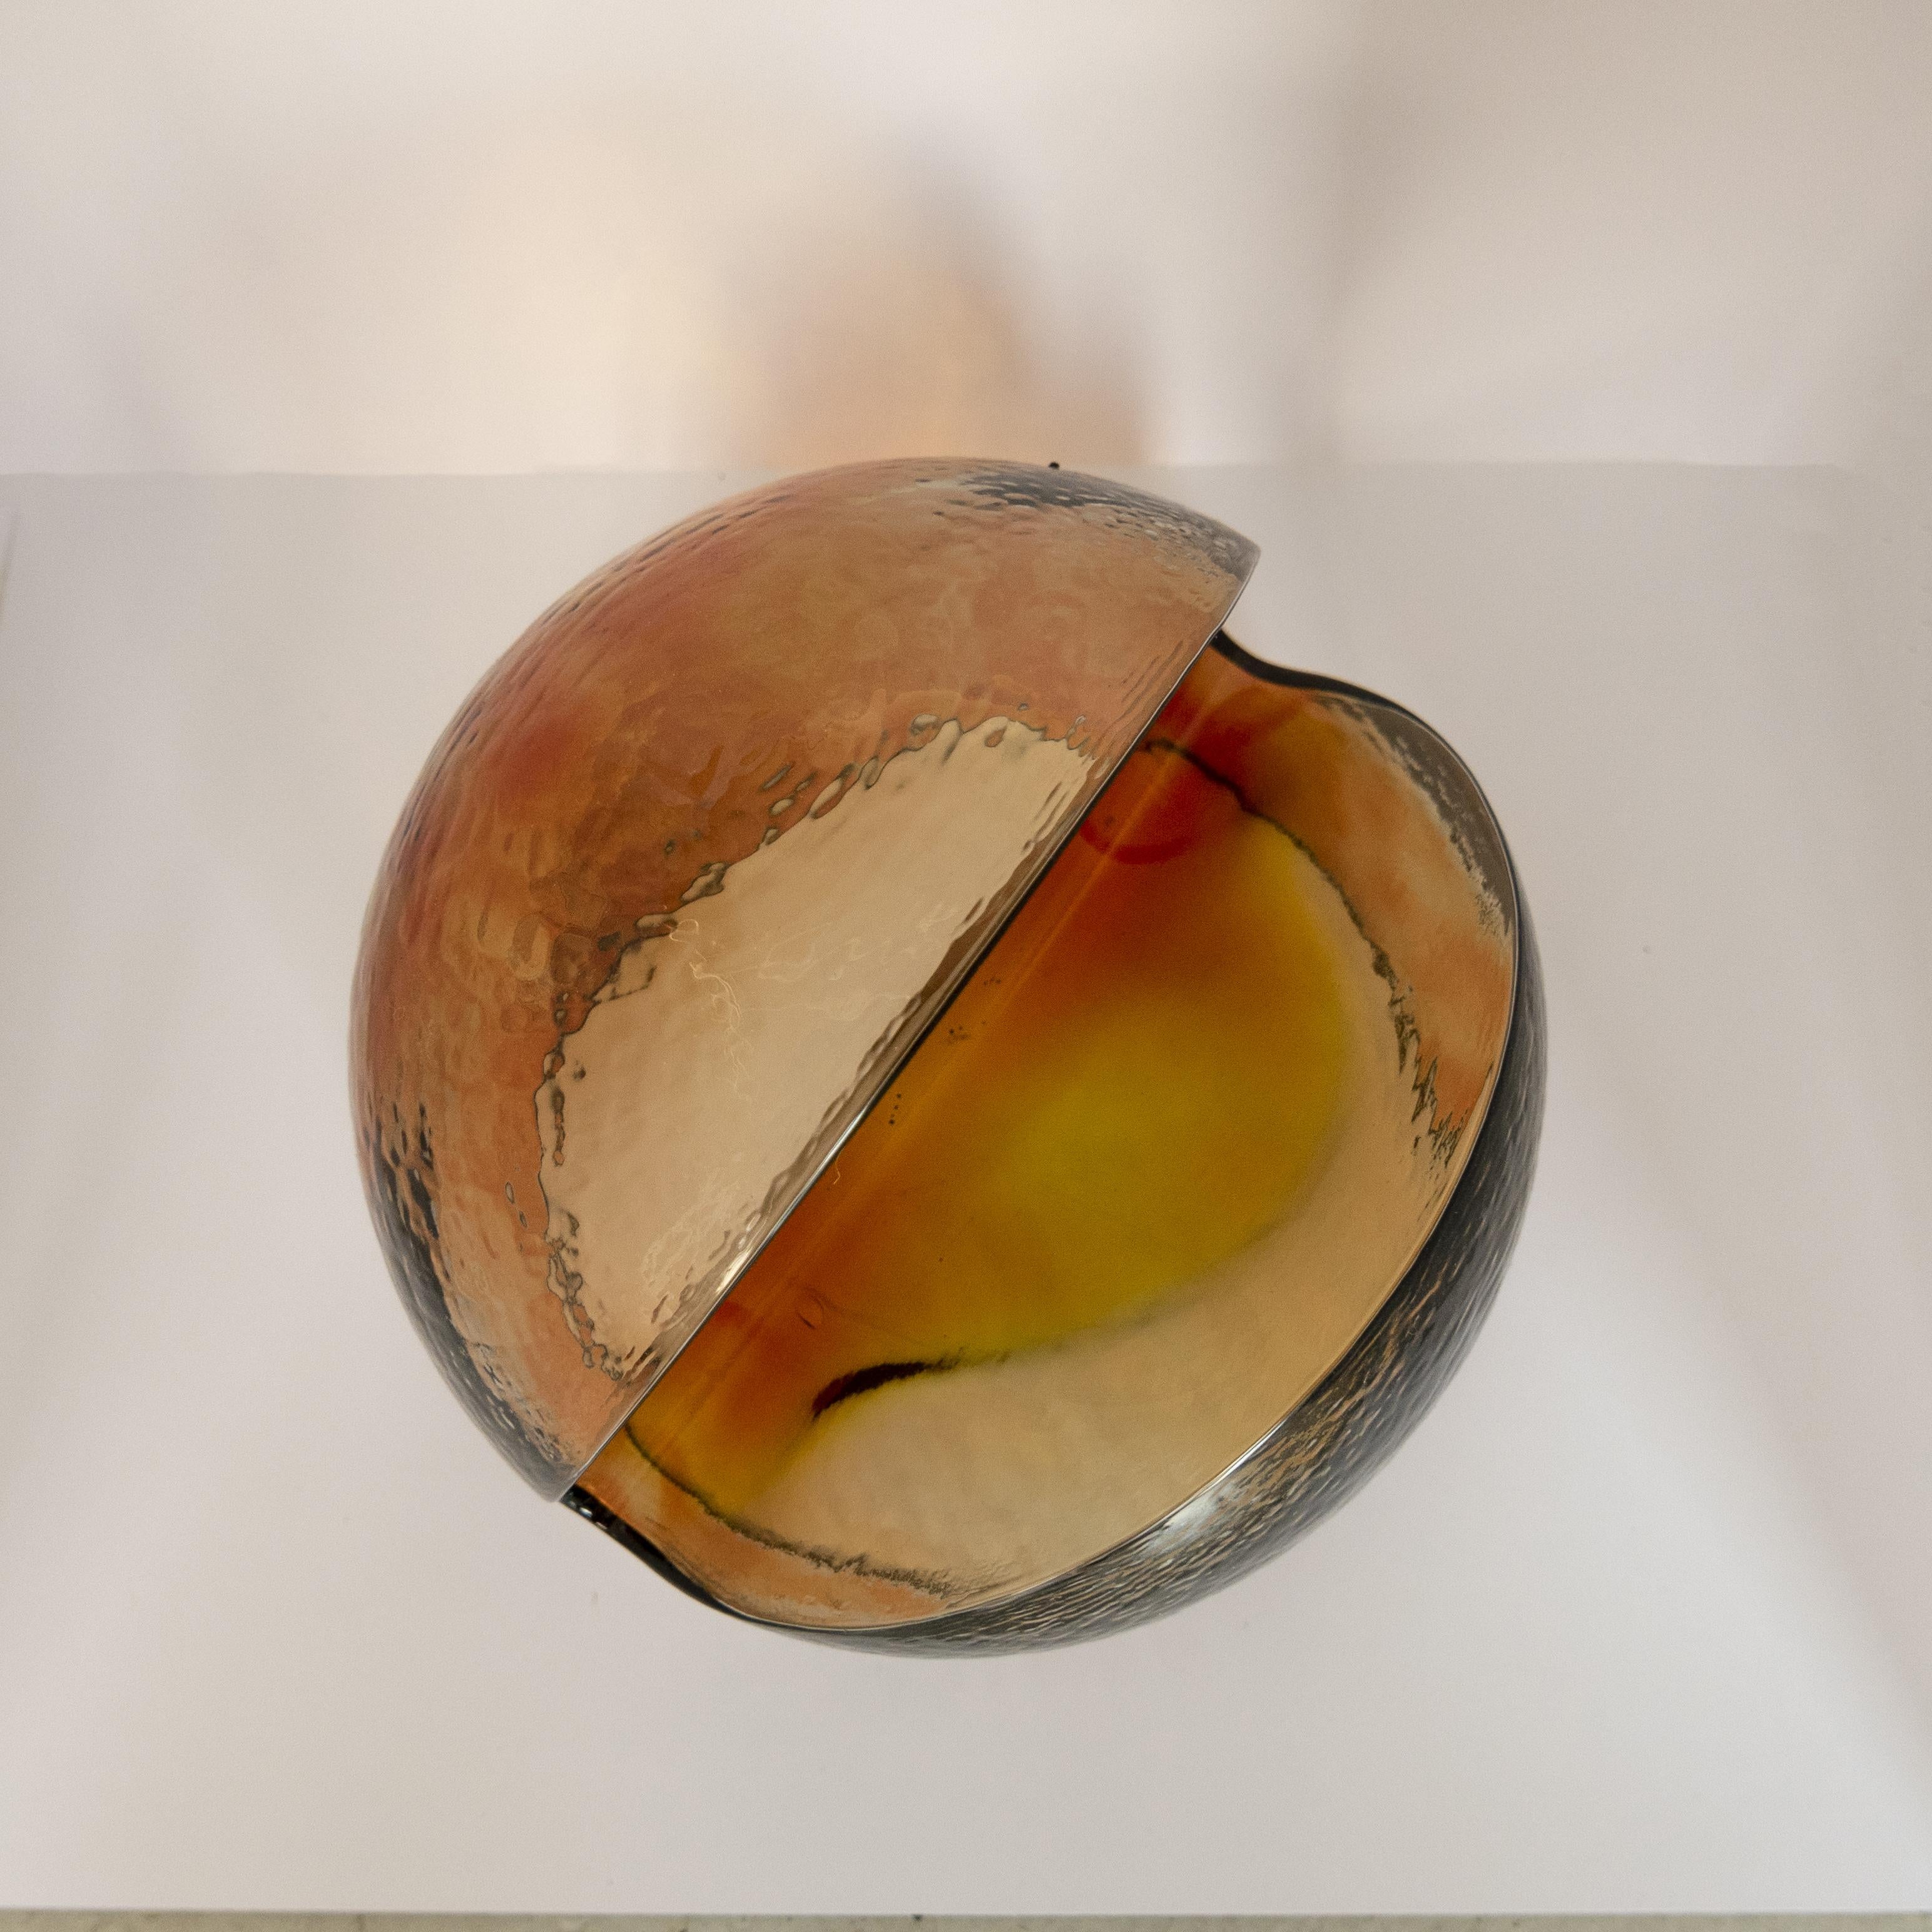 Mid-20th Century Vintage Orange Murano Glass Sculpture / Paperweight by Tony Zuccheri for VeArt